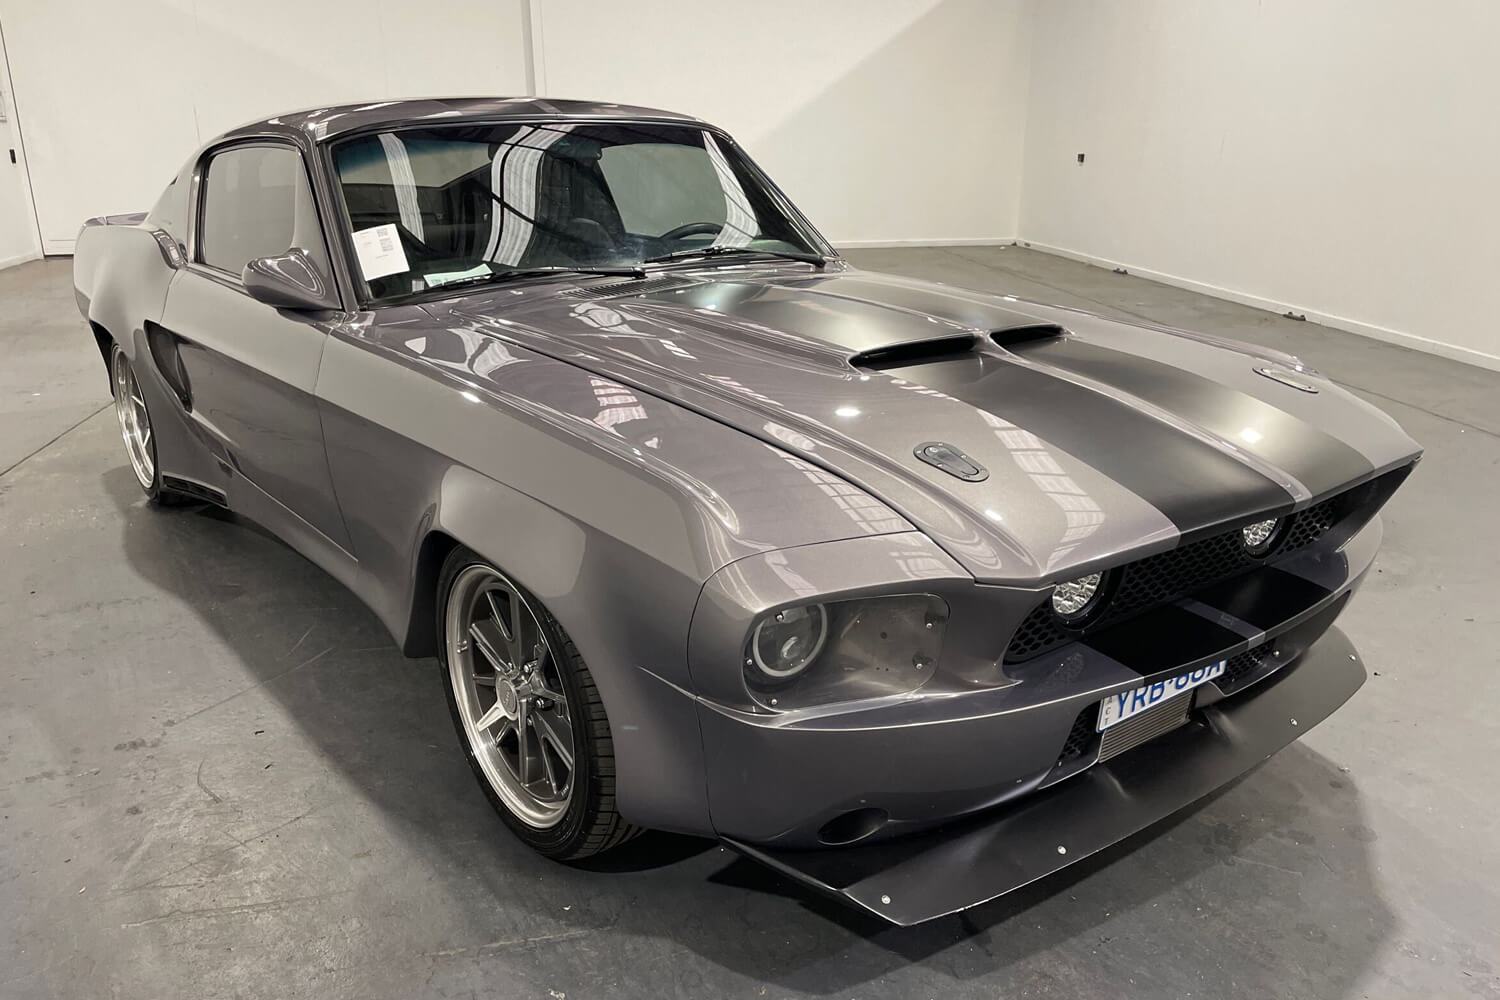 View a grey 1968 Ford Mustang The Quicksilver Resto-Mod available via auction.